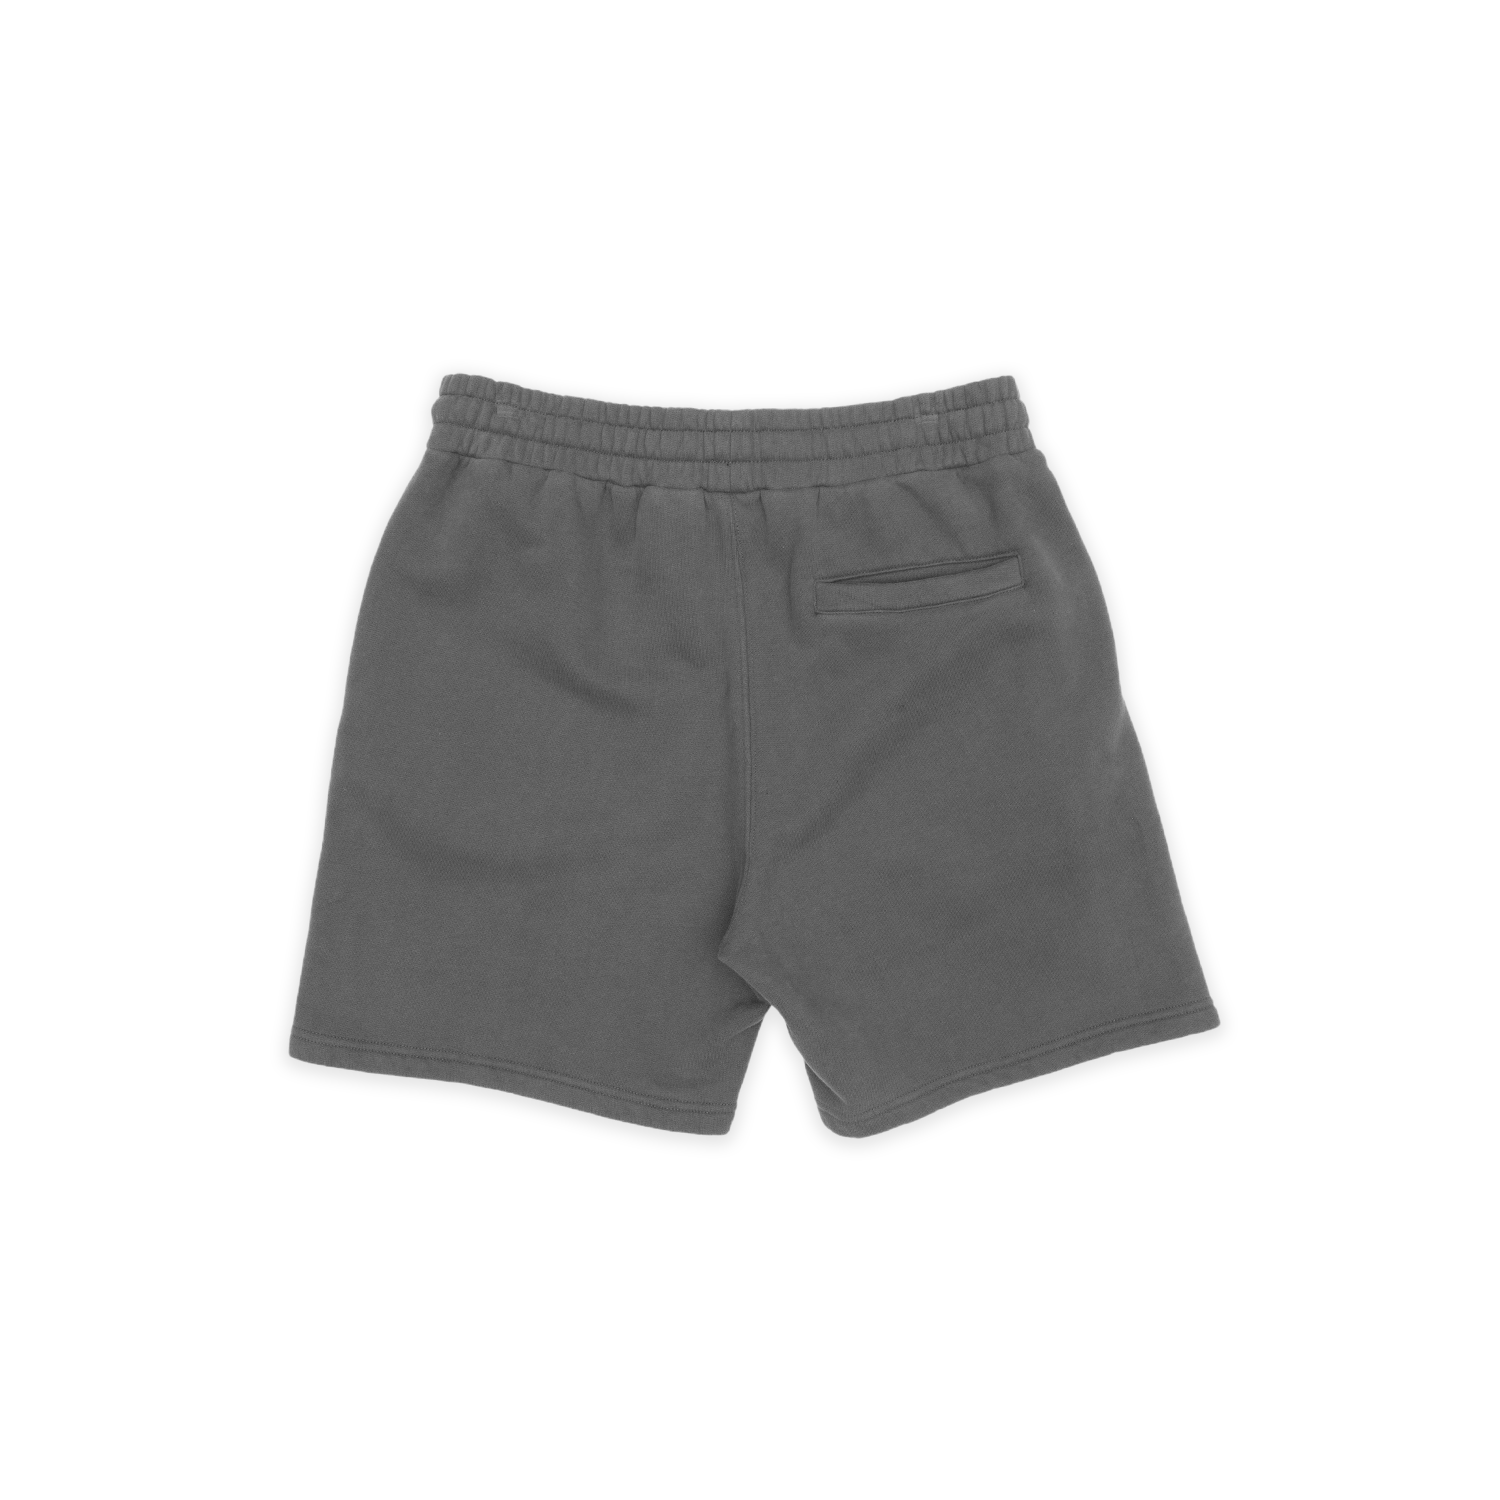 RL Productions Premium Terry Shorts Charcoal